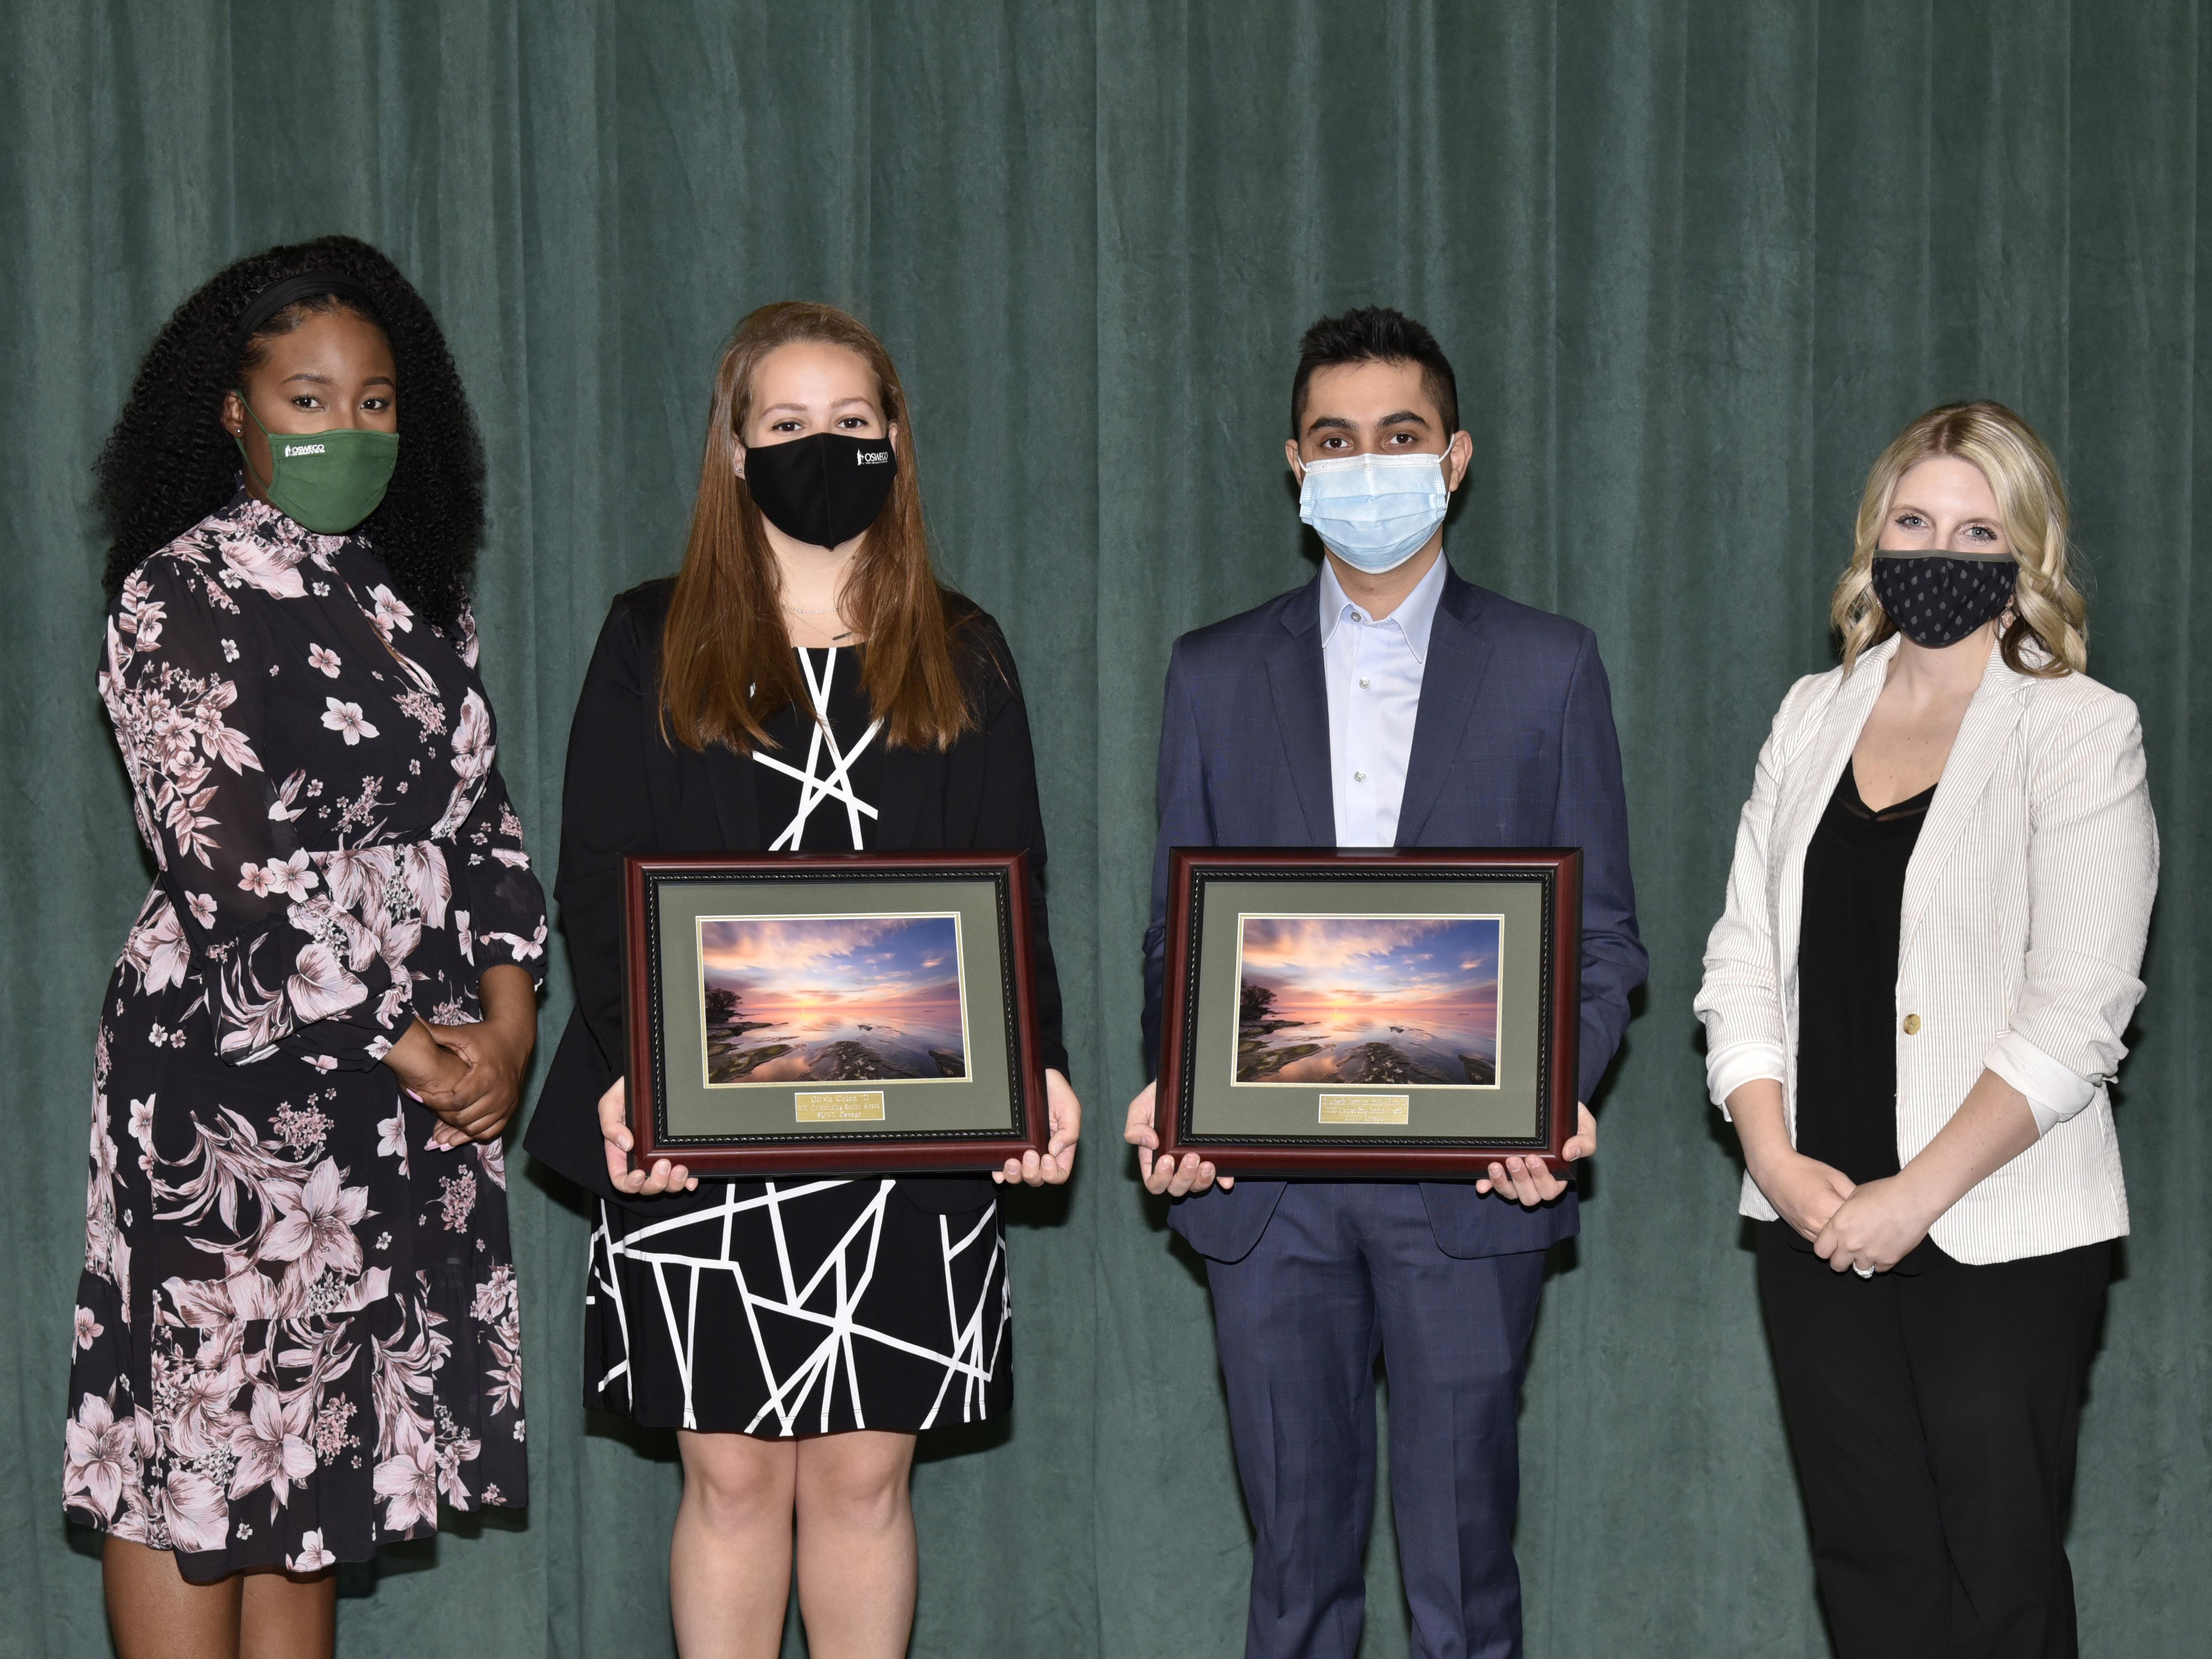 Koushank Harinder Singh Ahuja and Olivia Colon (second and third from left) earn congratulations from Kerisha Lewis (left) and Laura Kelly (right) for winning the Outstanding Student Awards